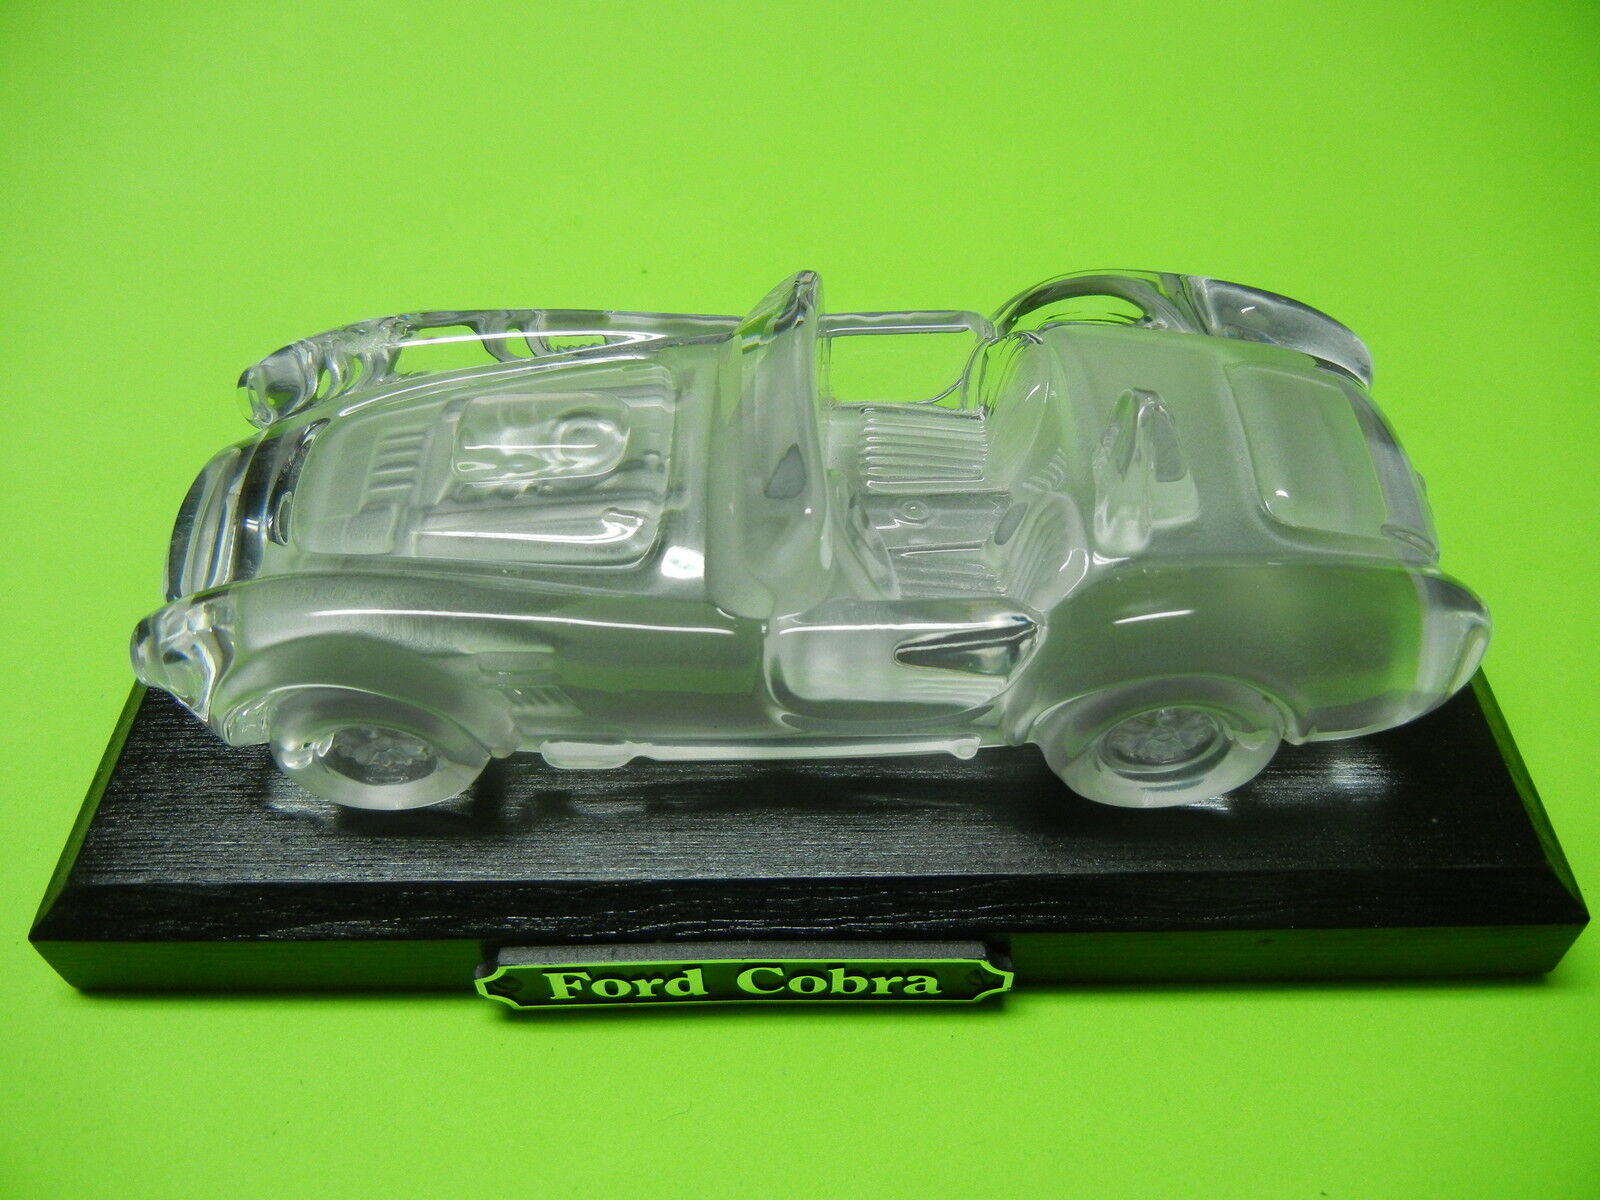 FORD 289 427 COBRA CRYSTAL AUTOMOBILE GLASS CAR PAPER WEIGHT  ( WITH STAND )